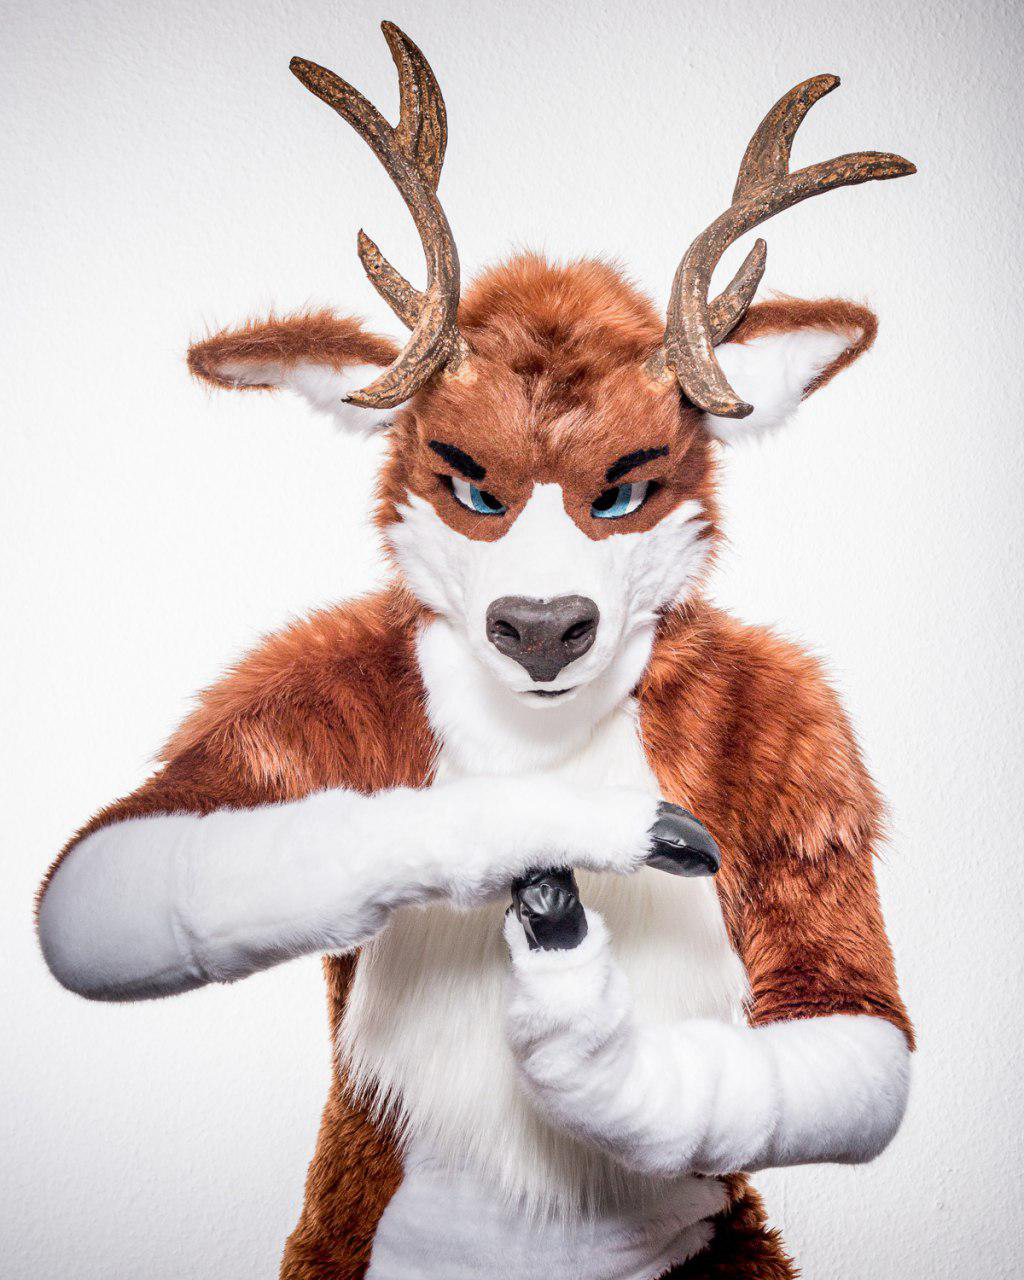 Noweti, also know as Deerweti was the first deer Fursuit I made. 